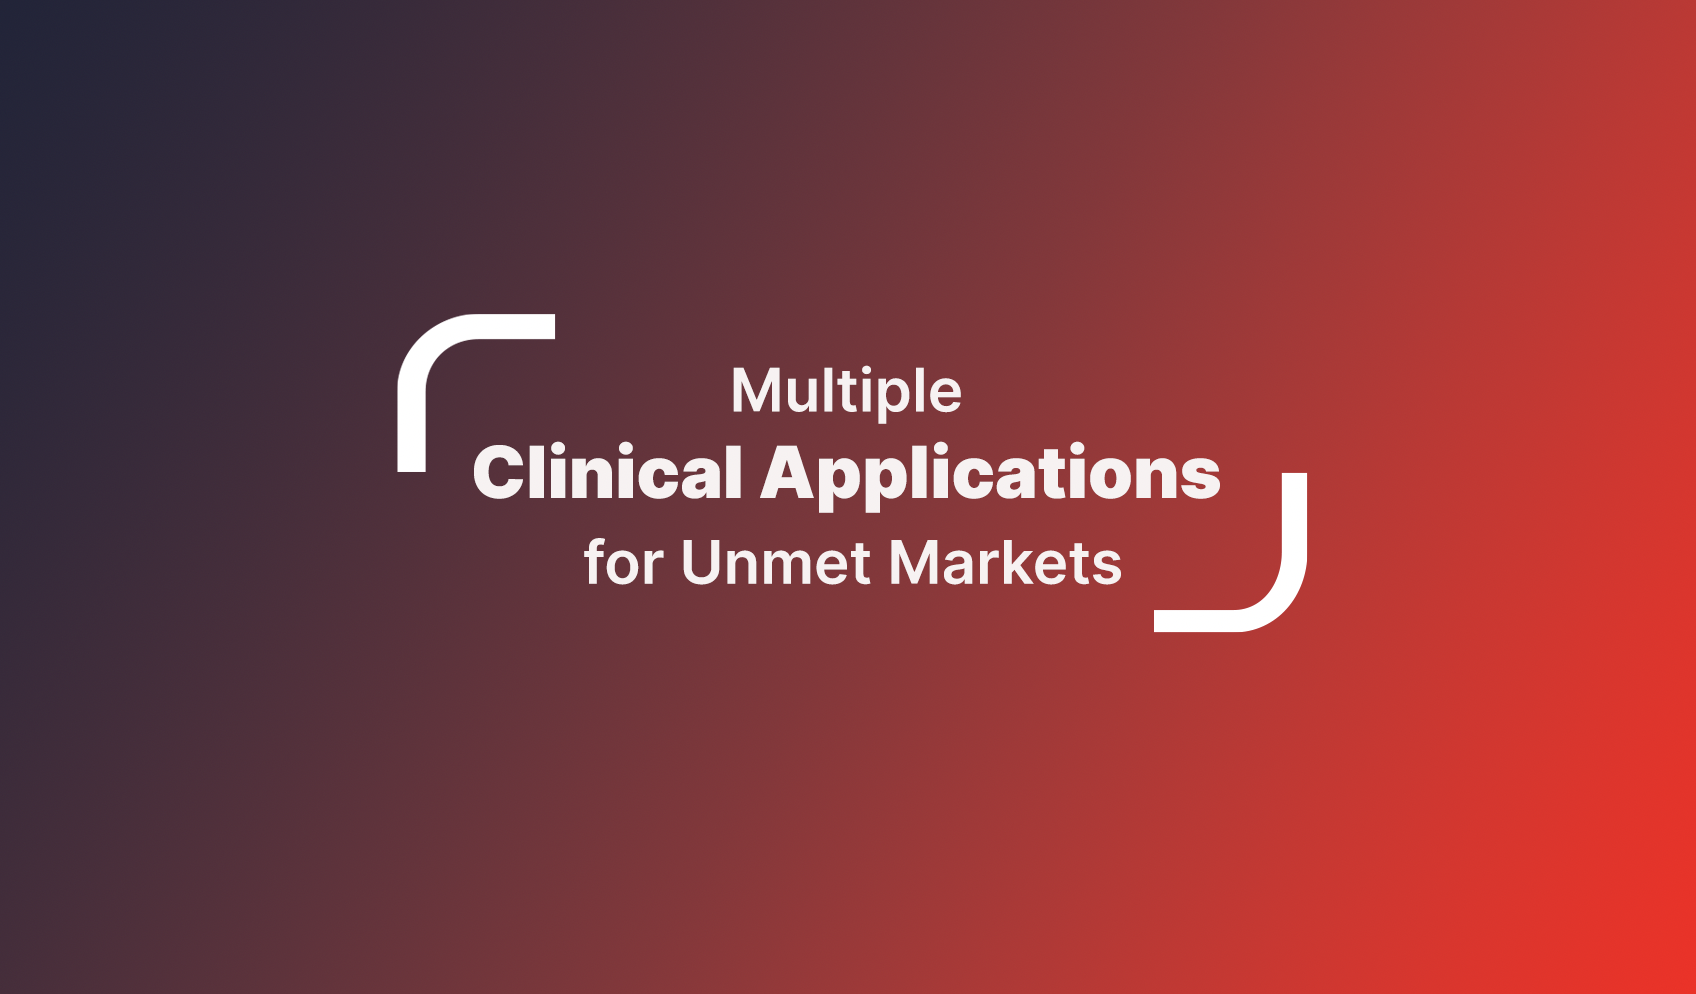 Artfun+: Multiple Clinical Applications for Unmet Markets